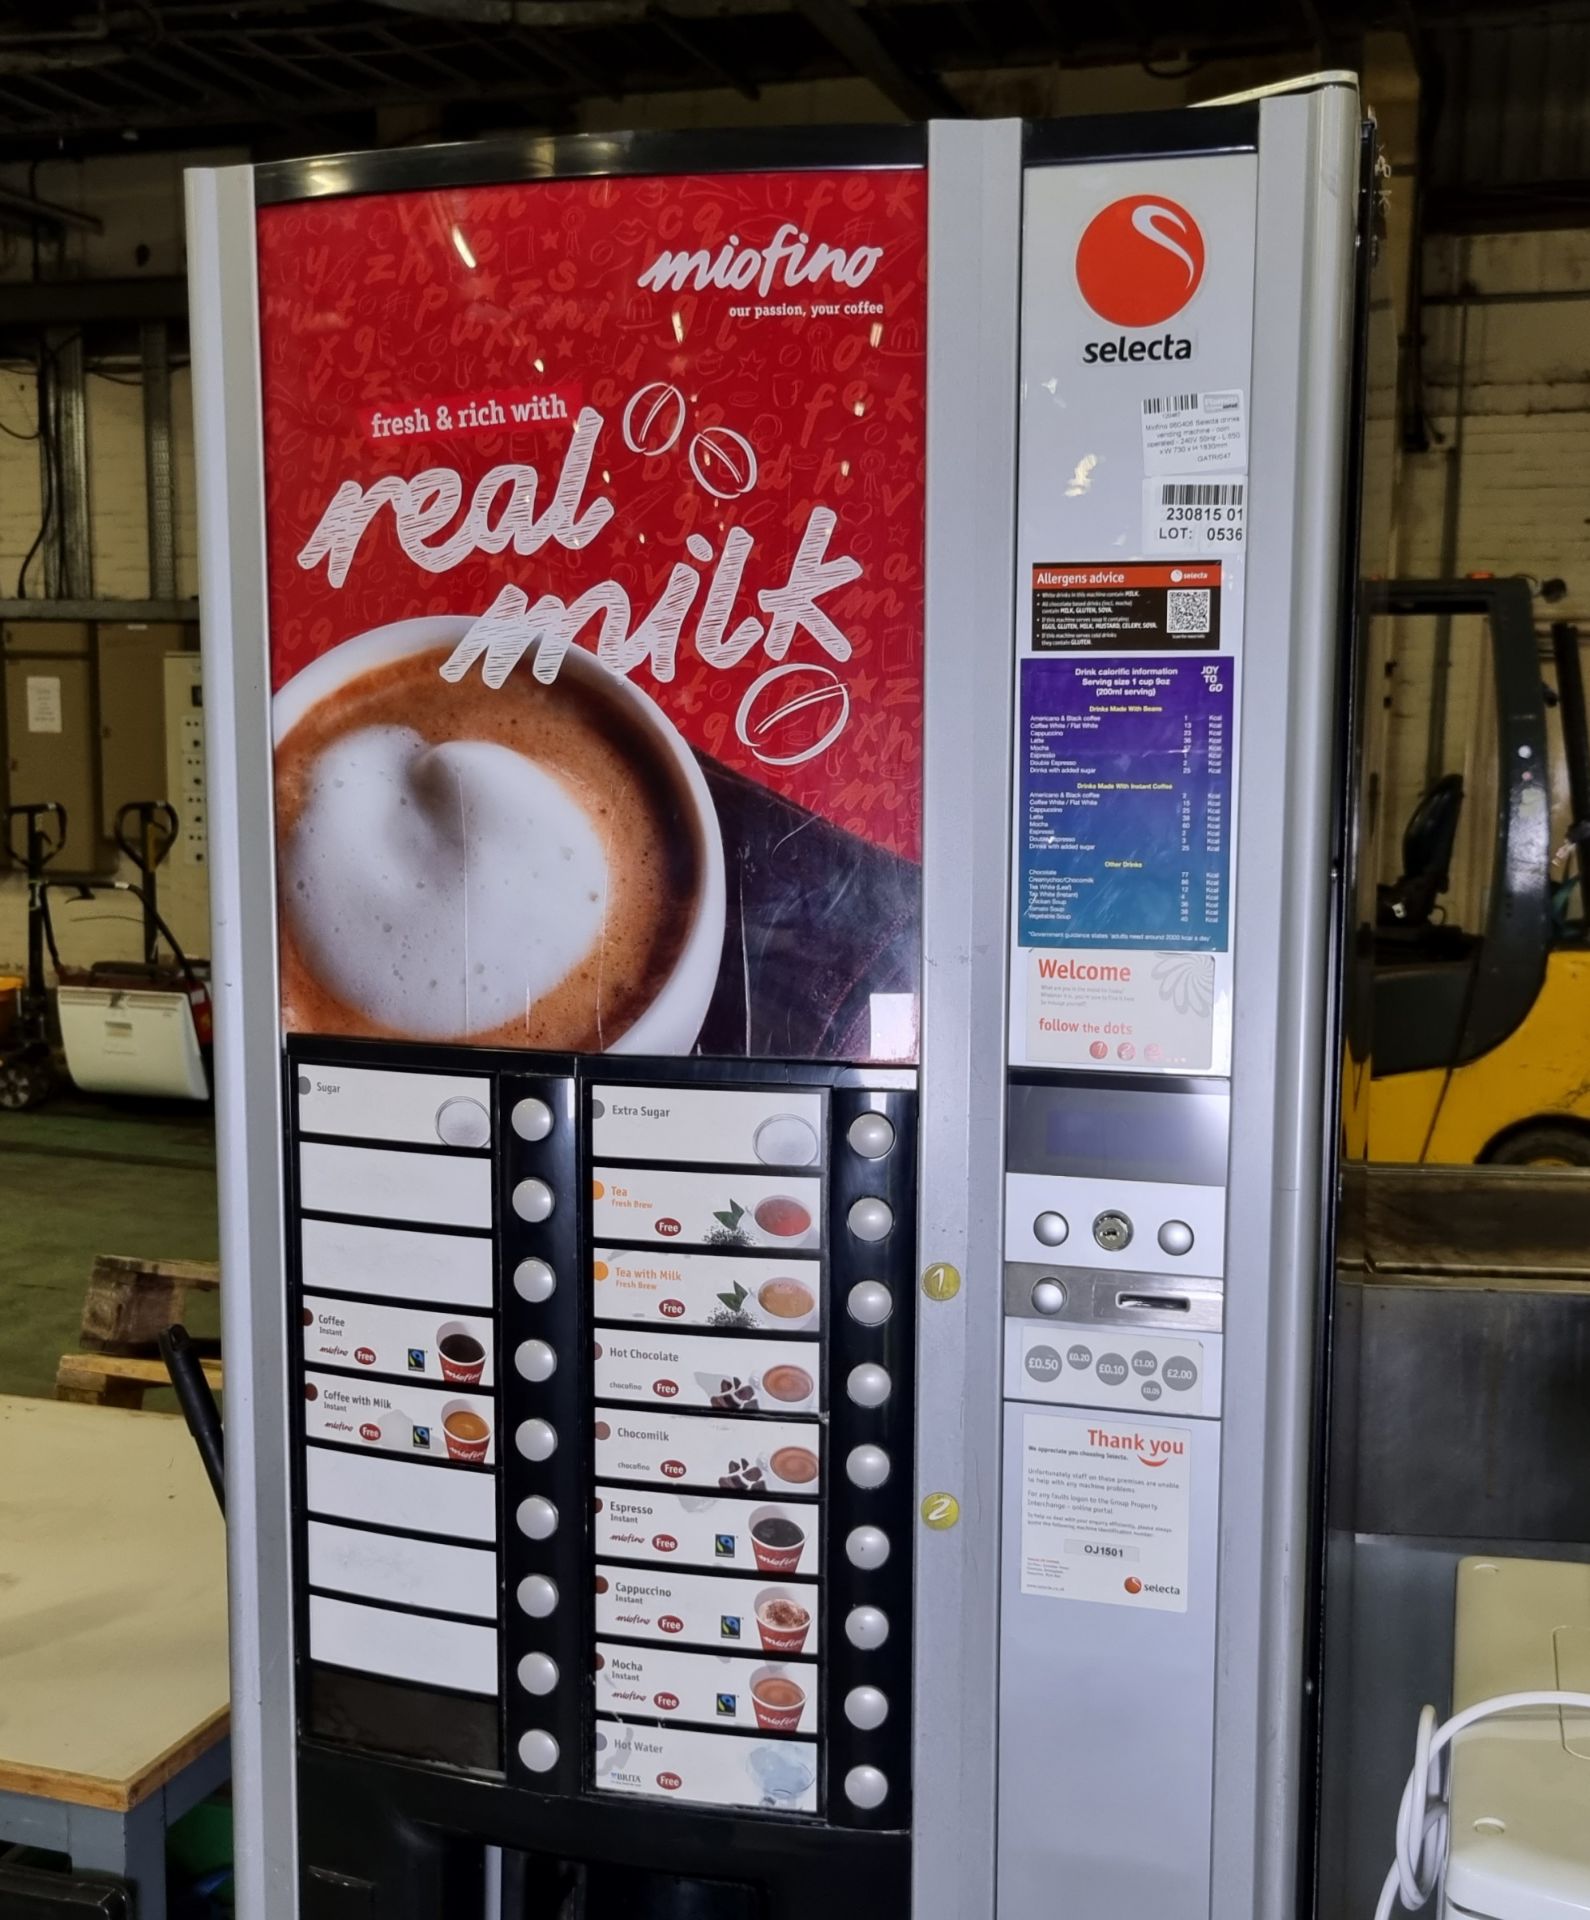 Miofino 960406 Selecta drinks vending machine - coin operated - 240V 50Hz - L 650 x W 730 x H 1830mm - Image 4 of 5